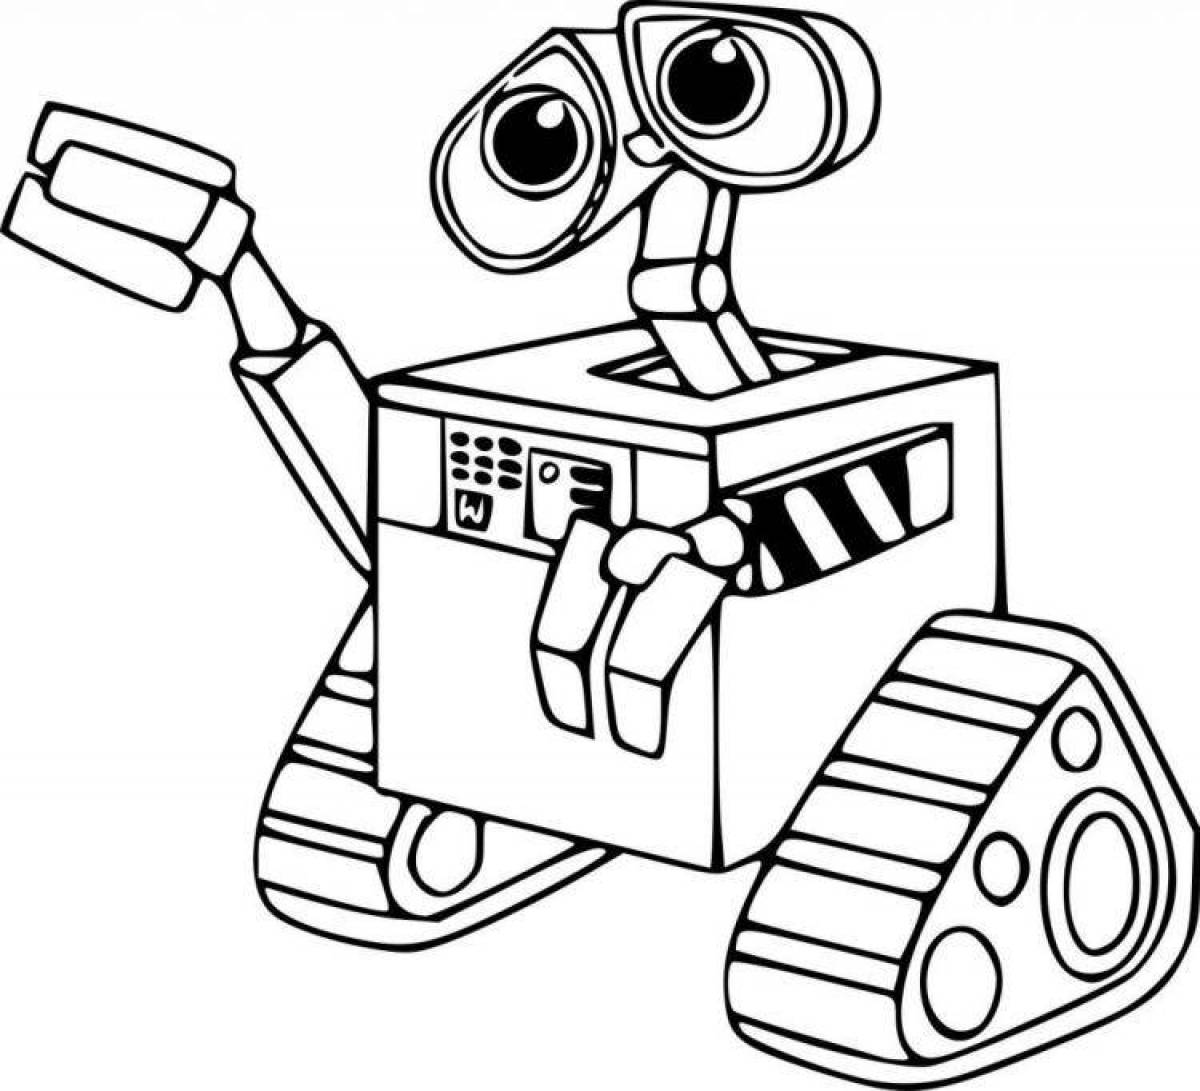 Coloring book funny boogie bot